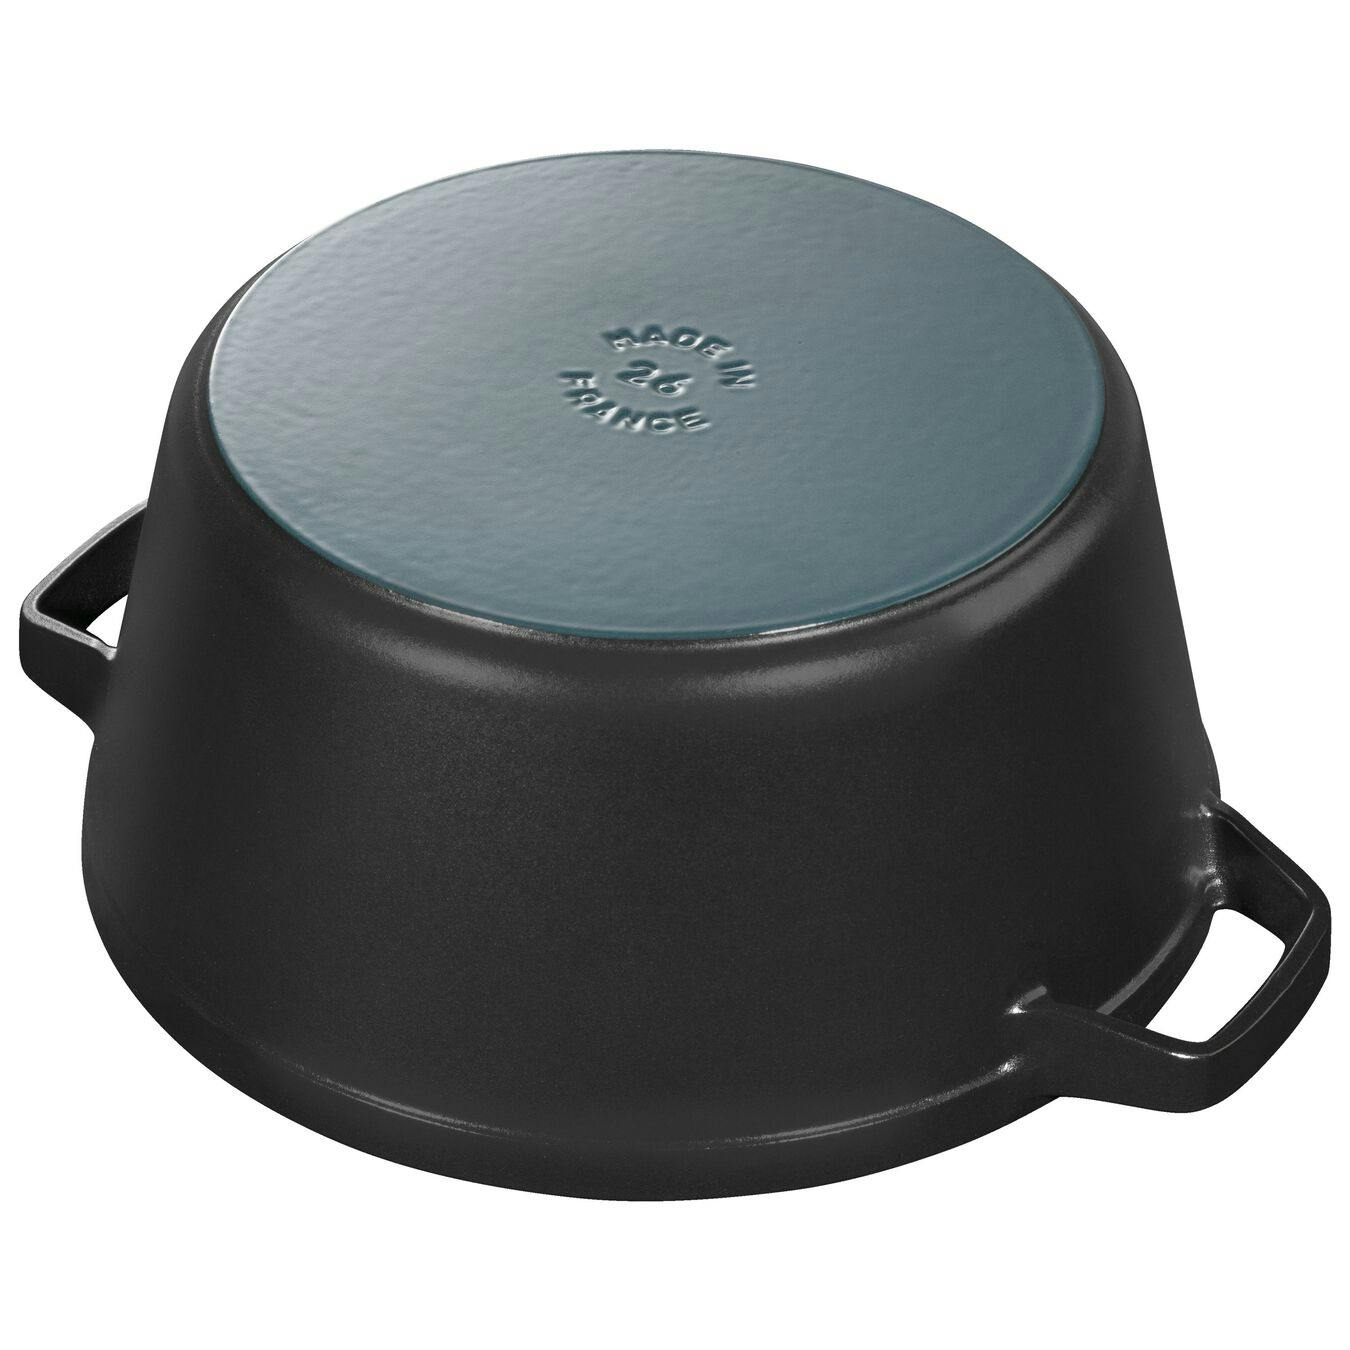 Staub Stackable Cast Iron Cookware Set - 4 Piece Matte Black – Cutlery and  More